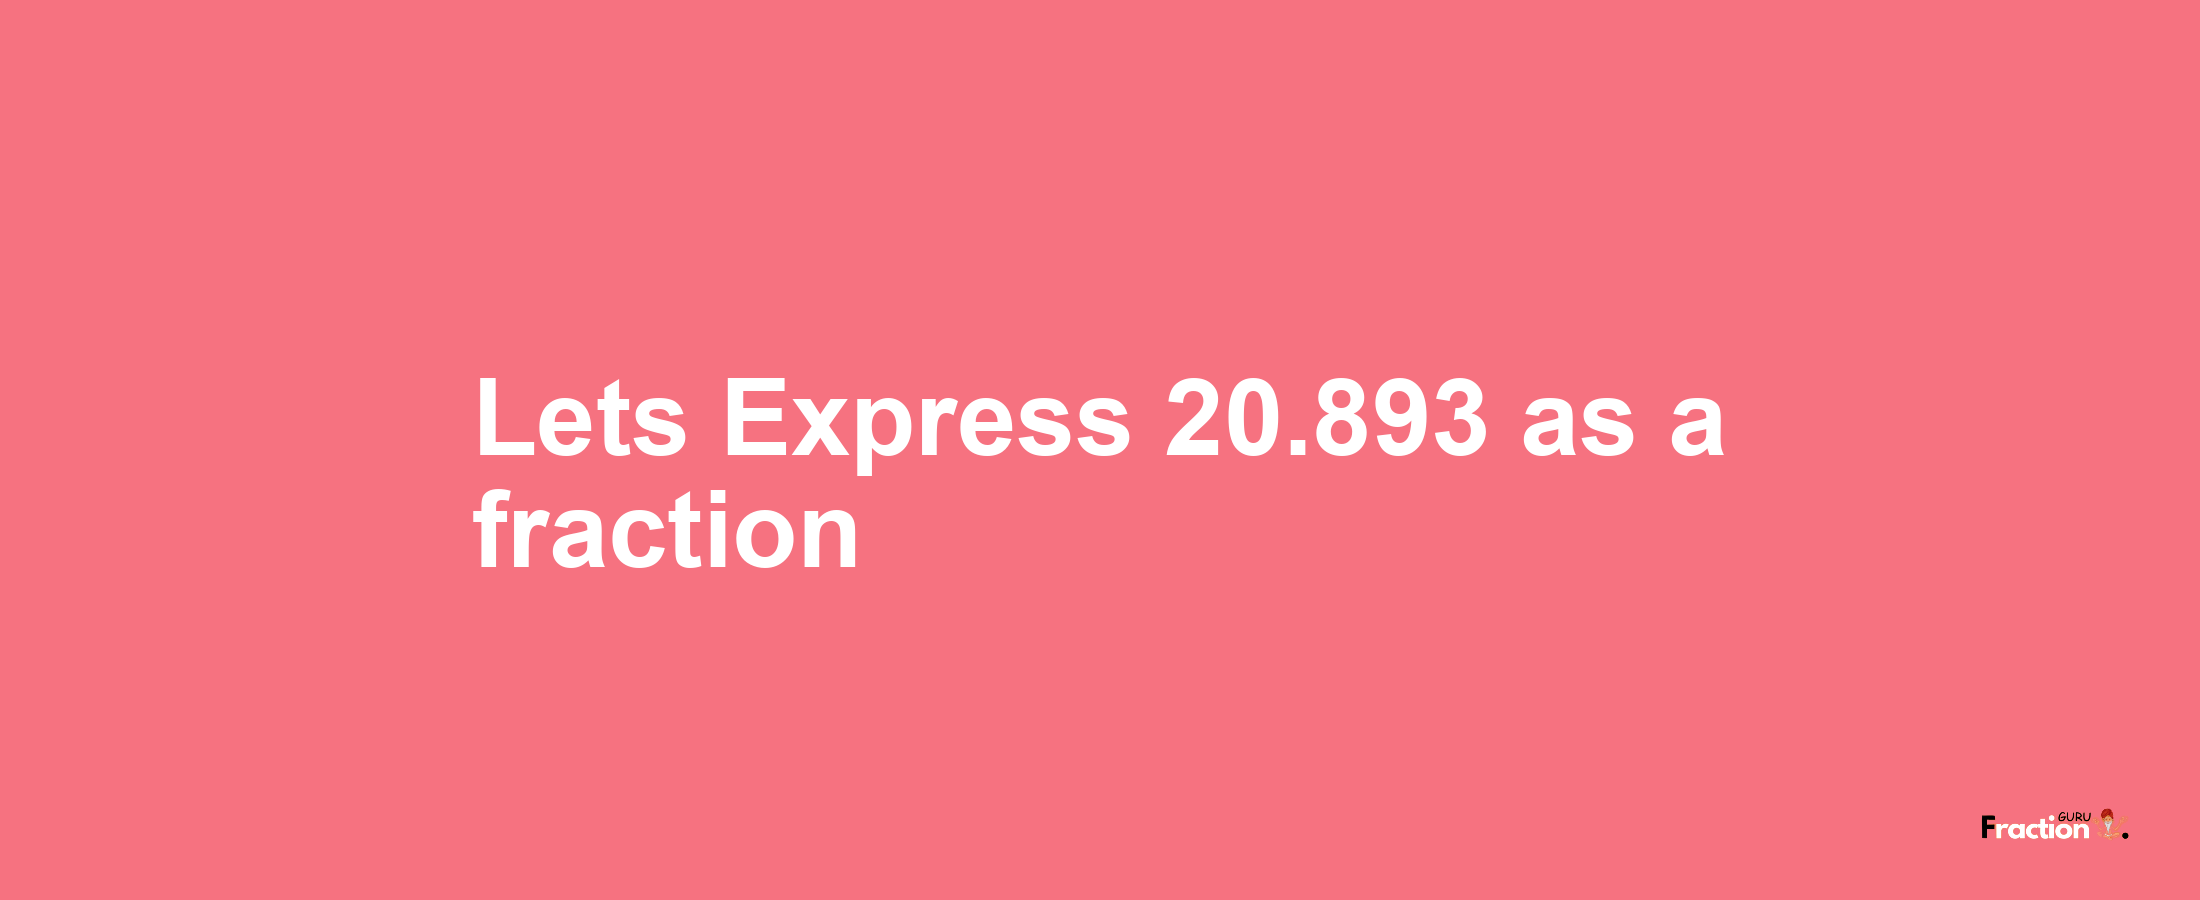 Lets Express 20.893 as afraction